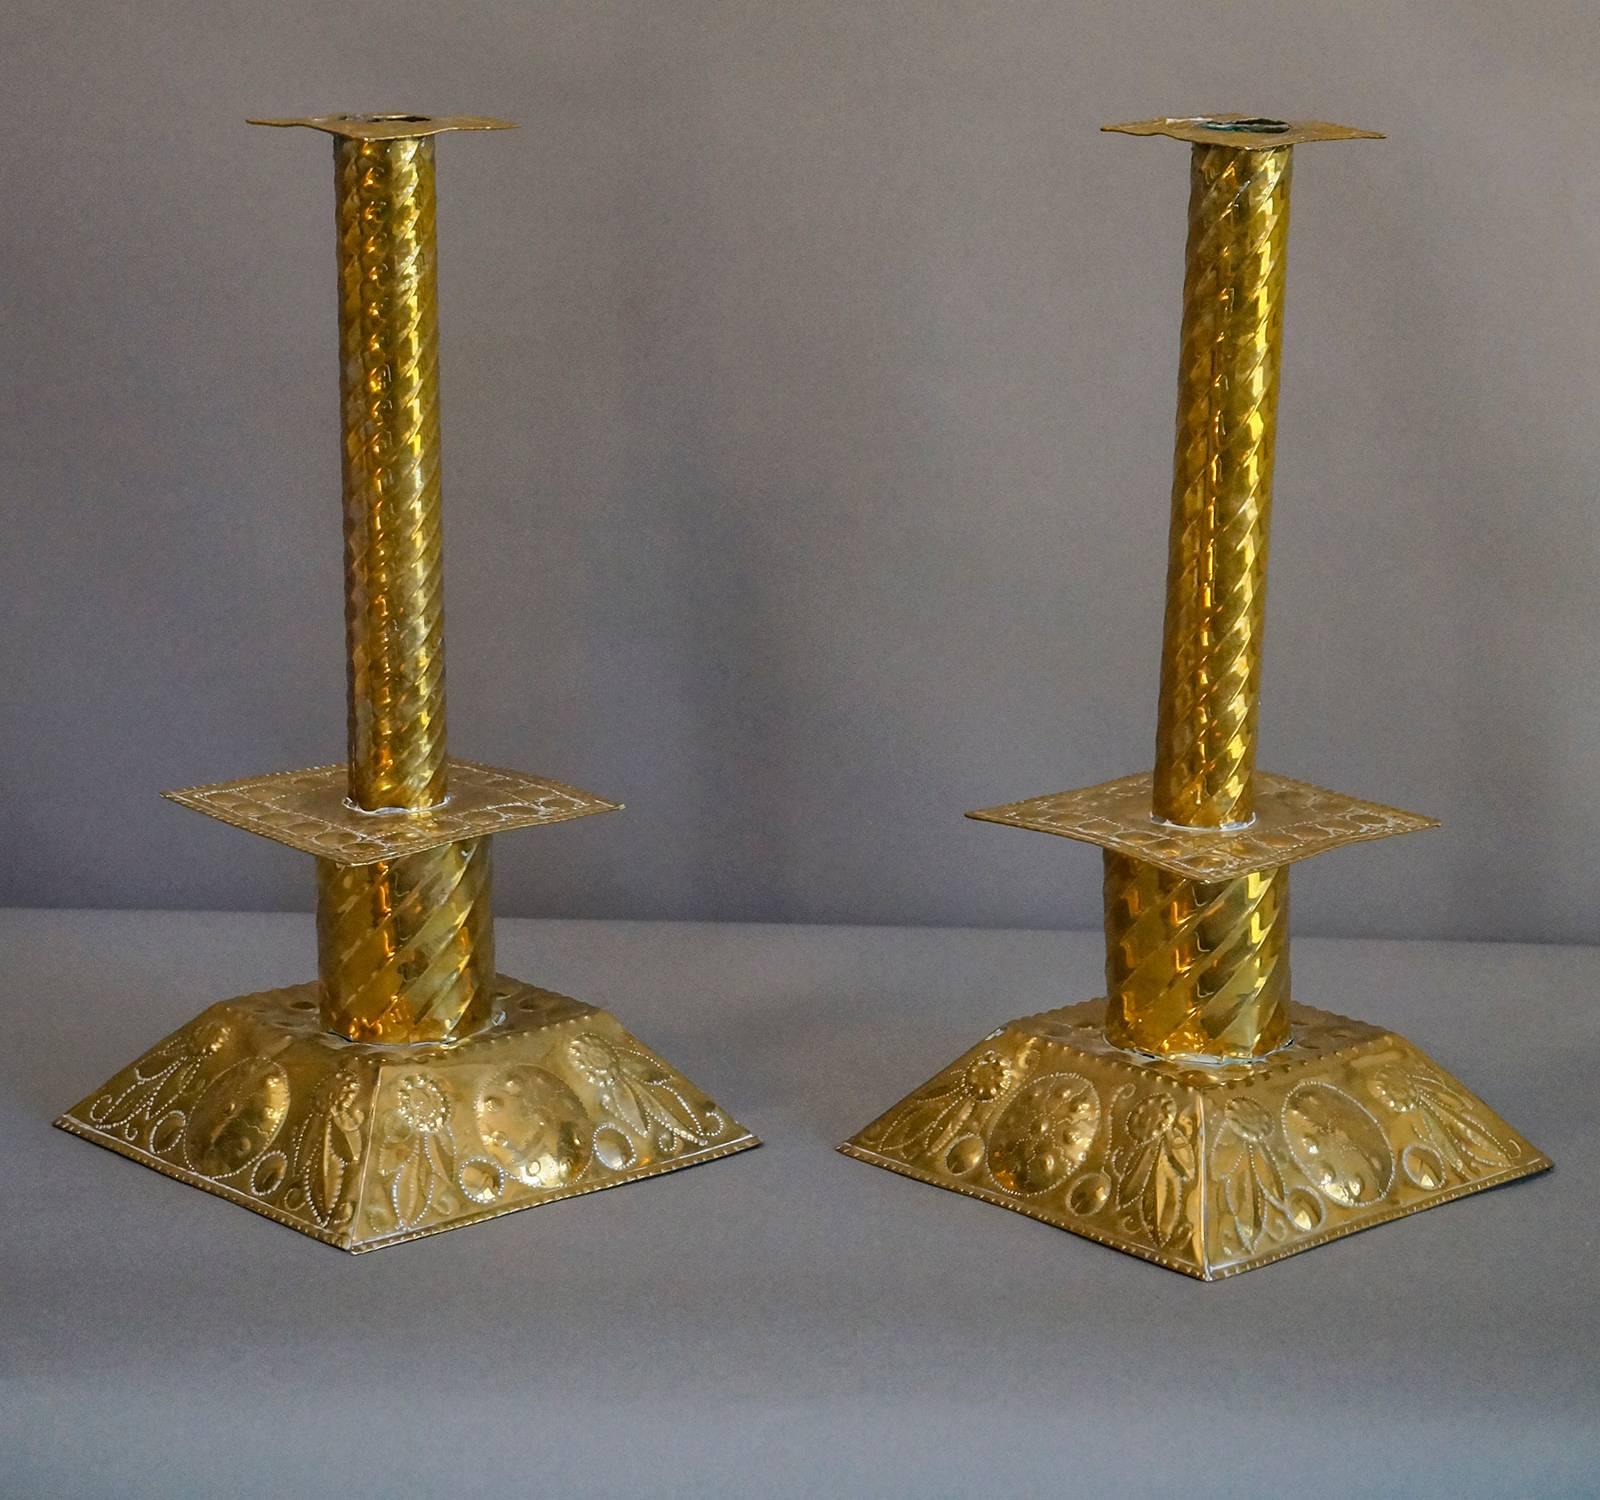 Pair of handmade Swedish candlesticks, circa 1880. The base is hammered and punched with flowers and foliage, and the stick has a twisted design. Highly polished.